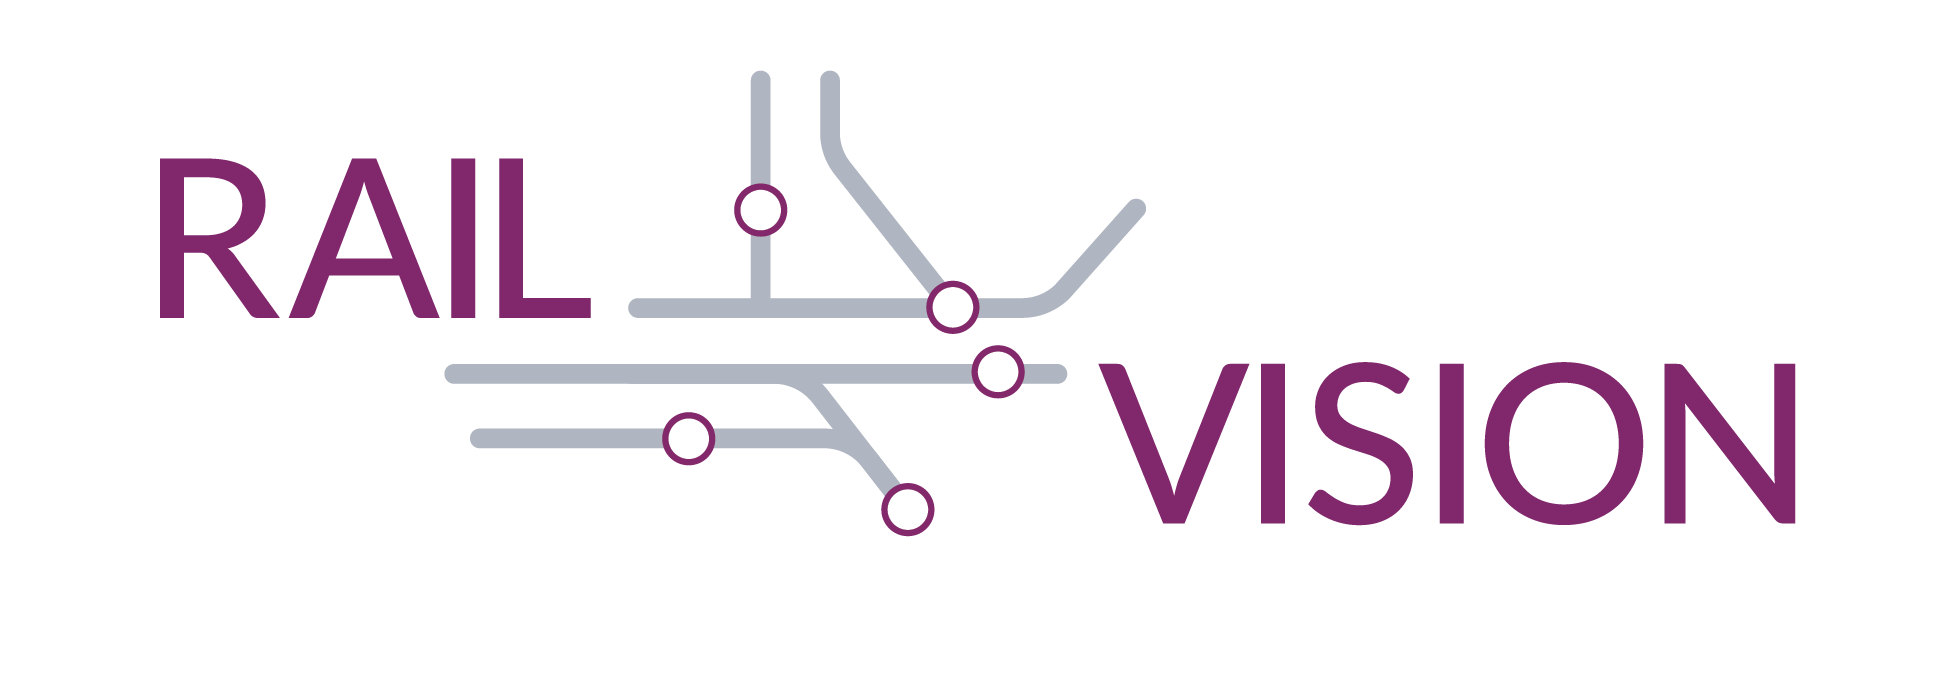 MBTA's Rail Vision Update: Open House and Presentation on Wednesday, October 23